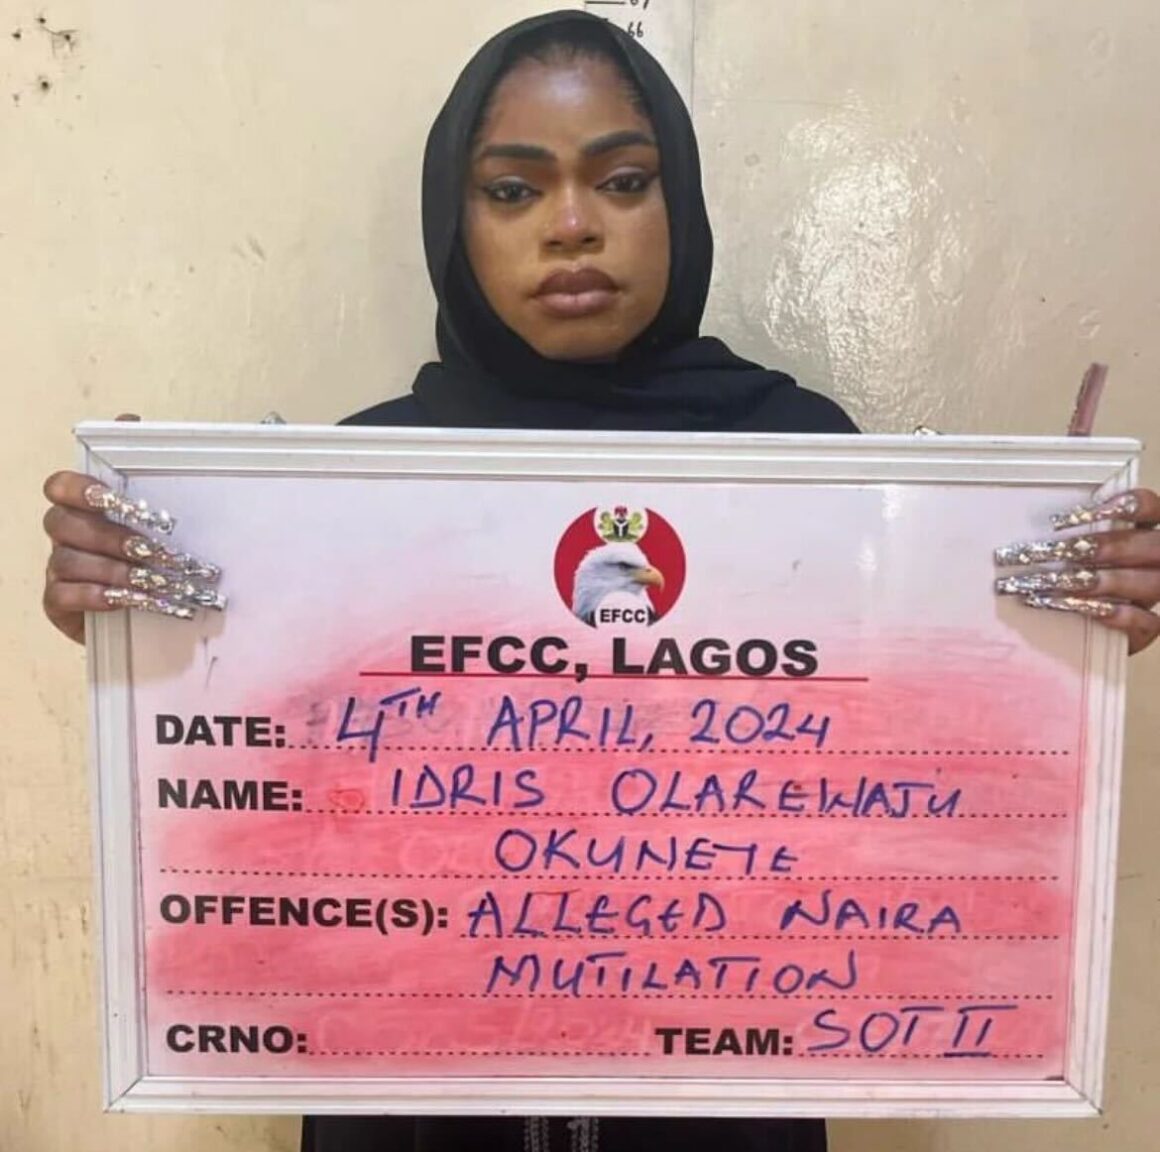 See video of why Bobrisky was arrested